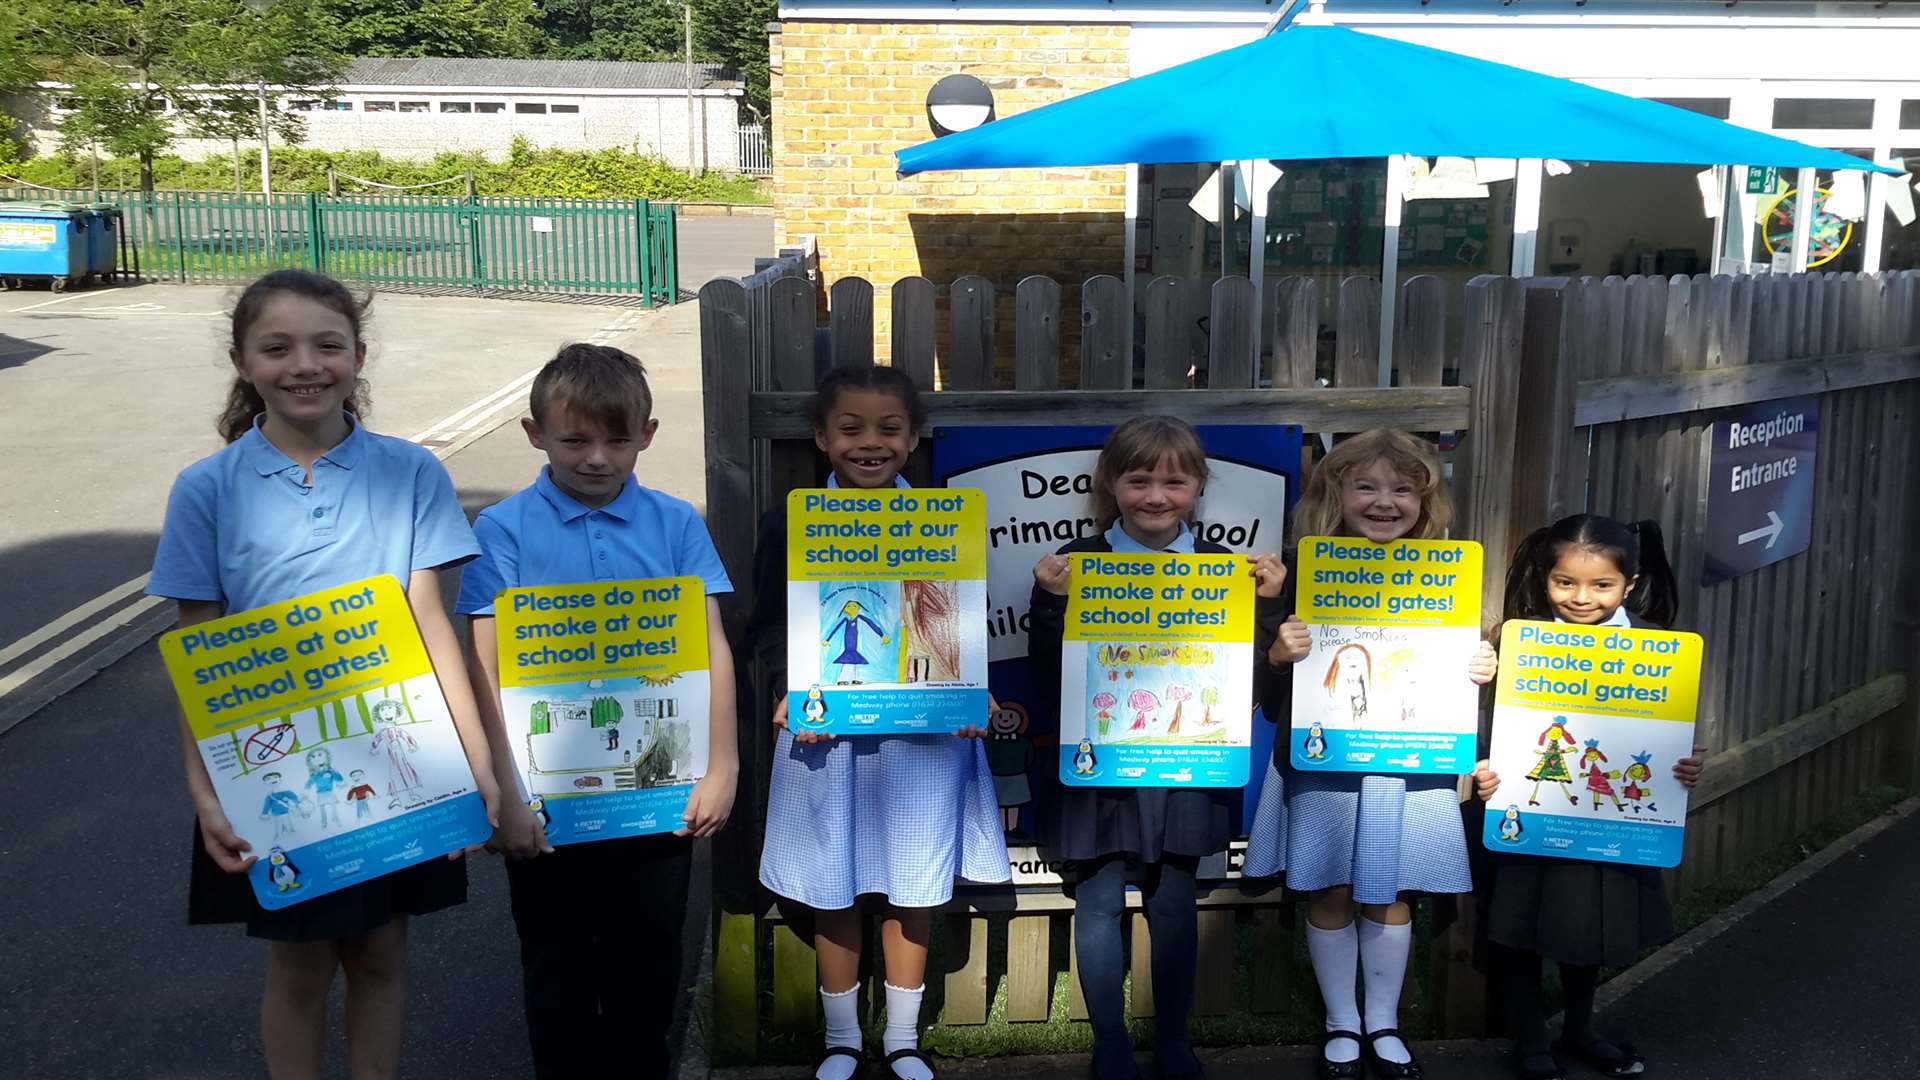 Deanwood Primary School children are hoping these signs will put parents off from smoking at the school gates